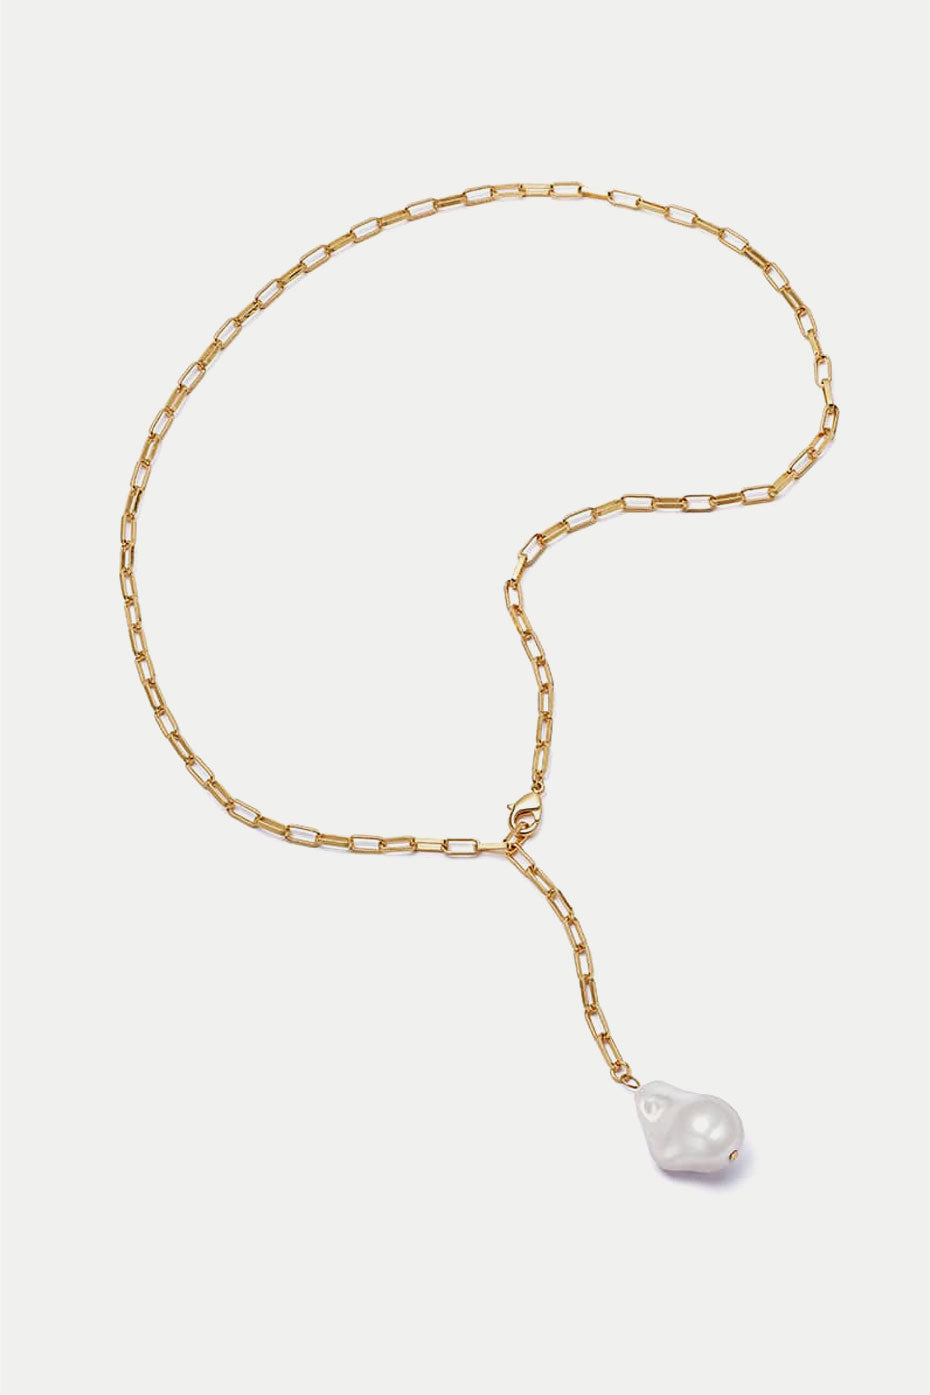 Daisy London Gold Plated Polly Sayer Lariet Necklace